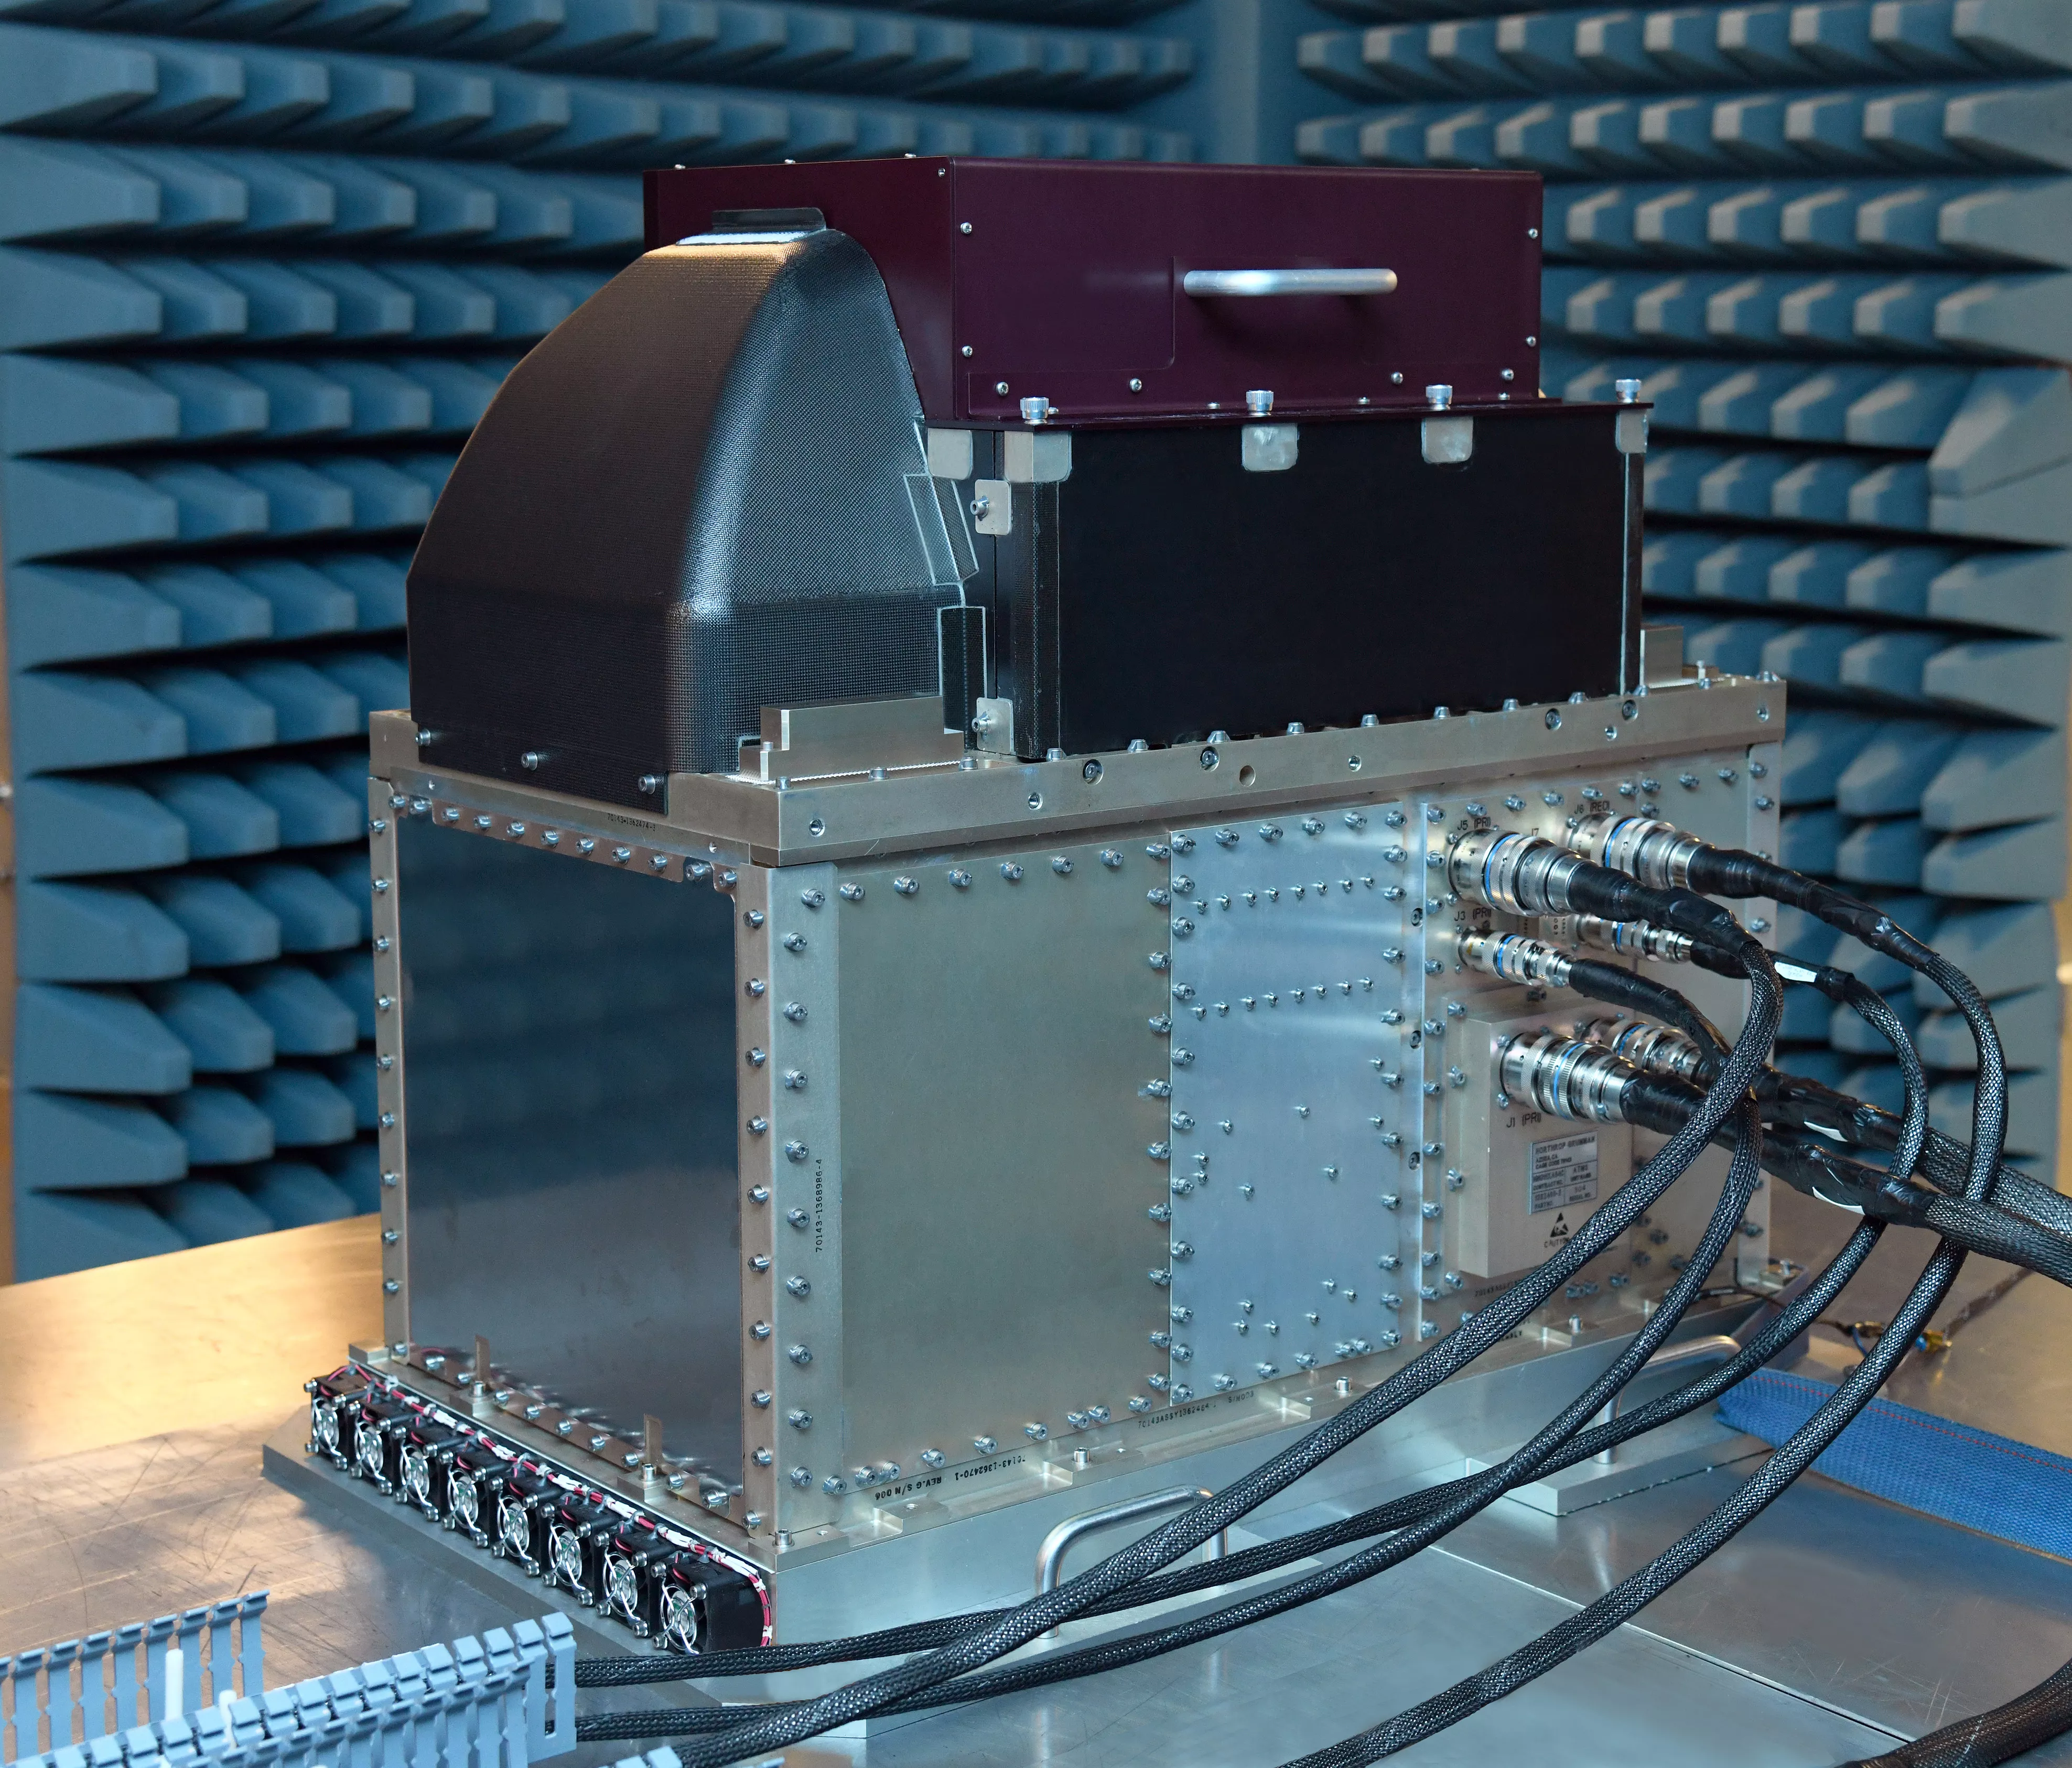 Image of the Advanced Technology Microwave Sounder (ATMS) 